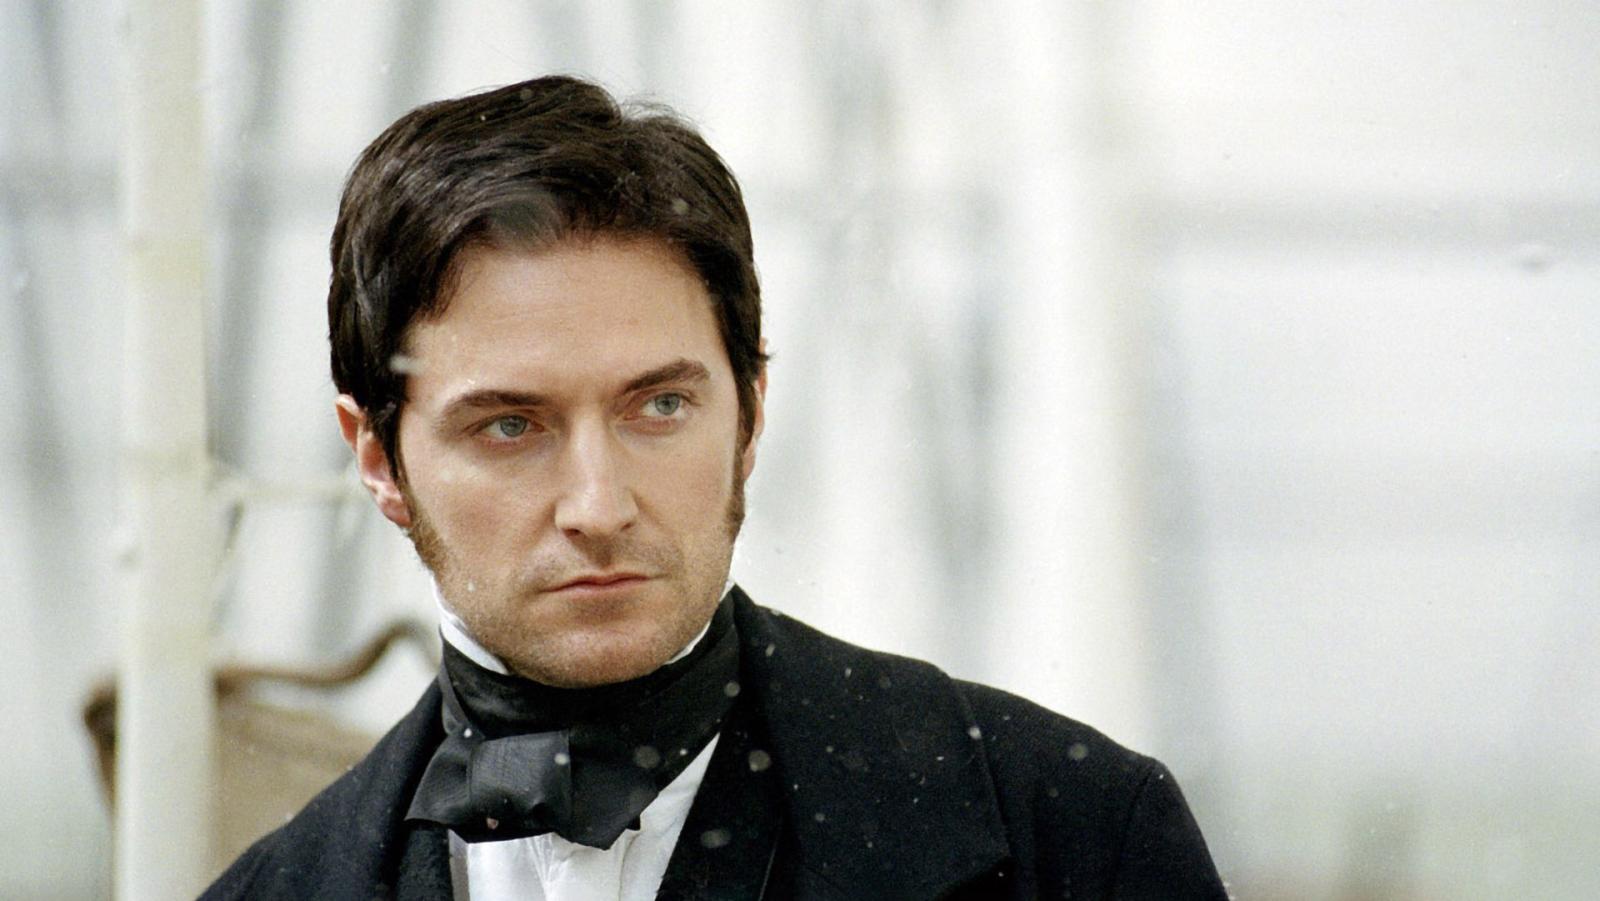 Looking For Your Next Binge? 6 Must-Watch Period Dramas, According to Reddit - image 6